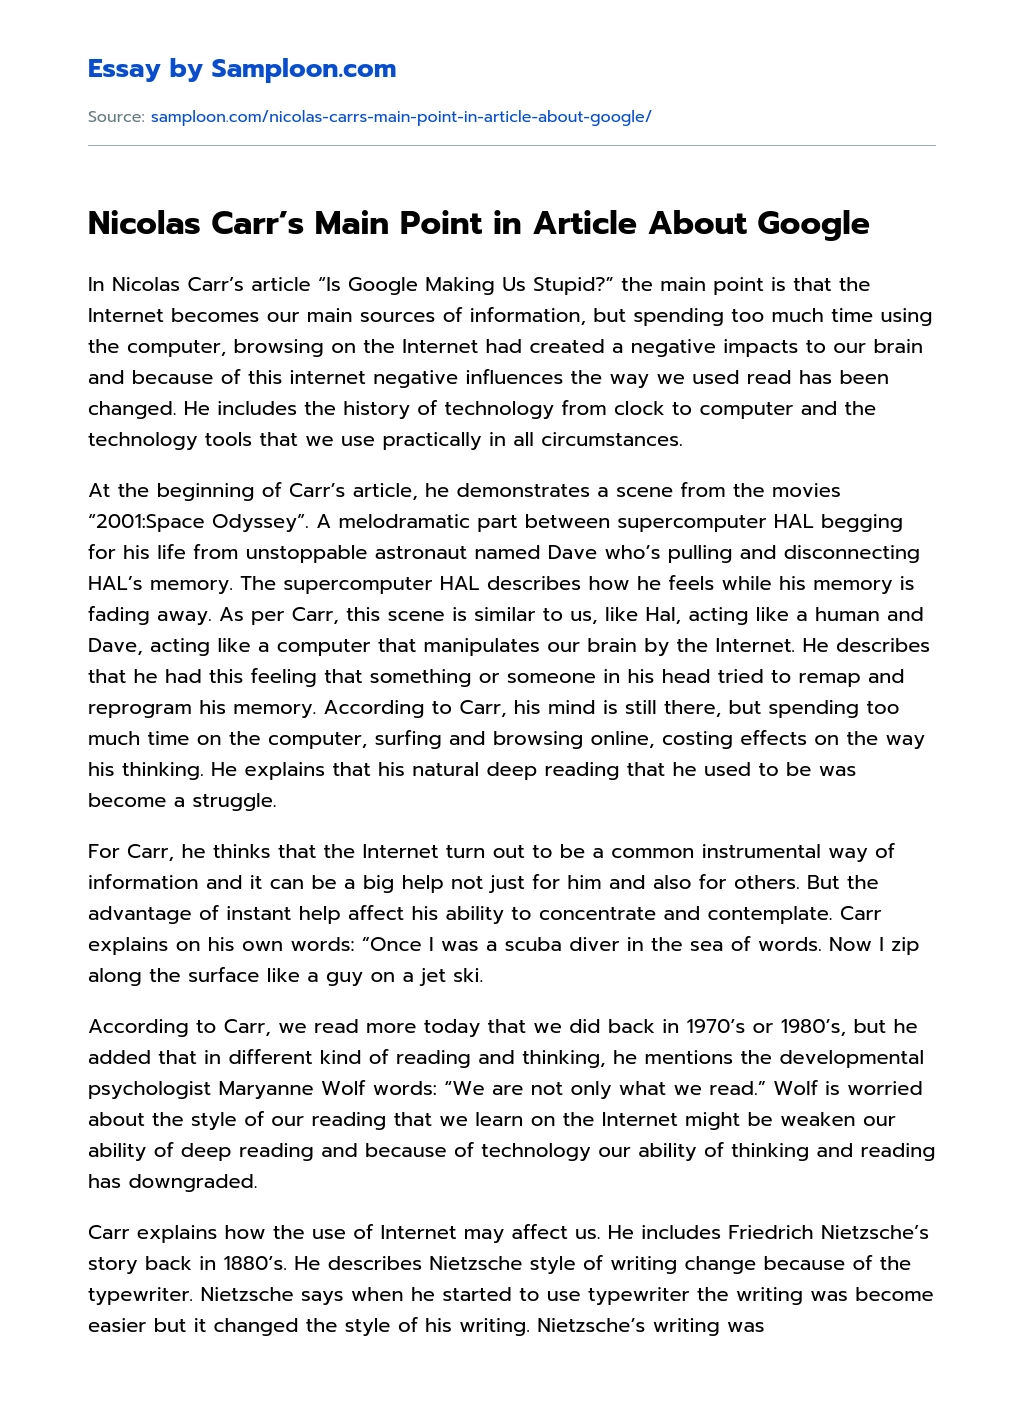 Nicolas Carr’s Main Point in Article About Google essay